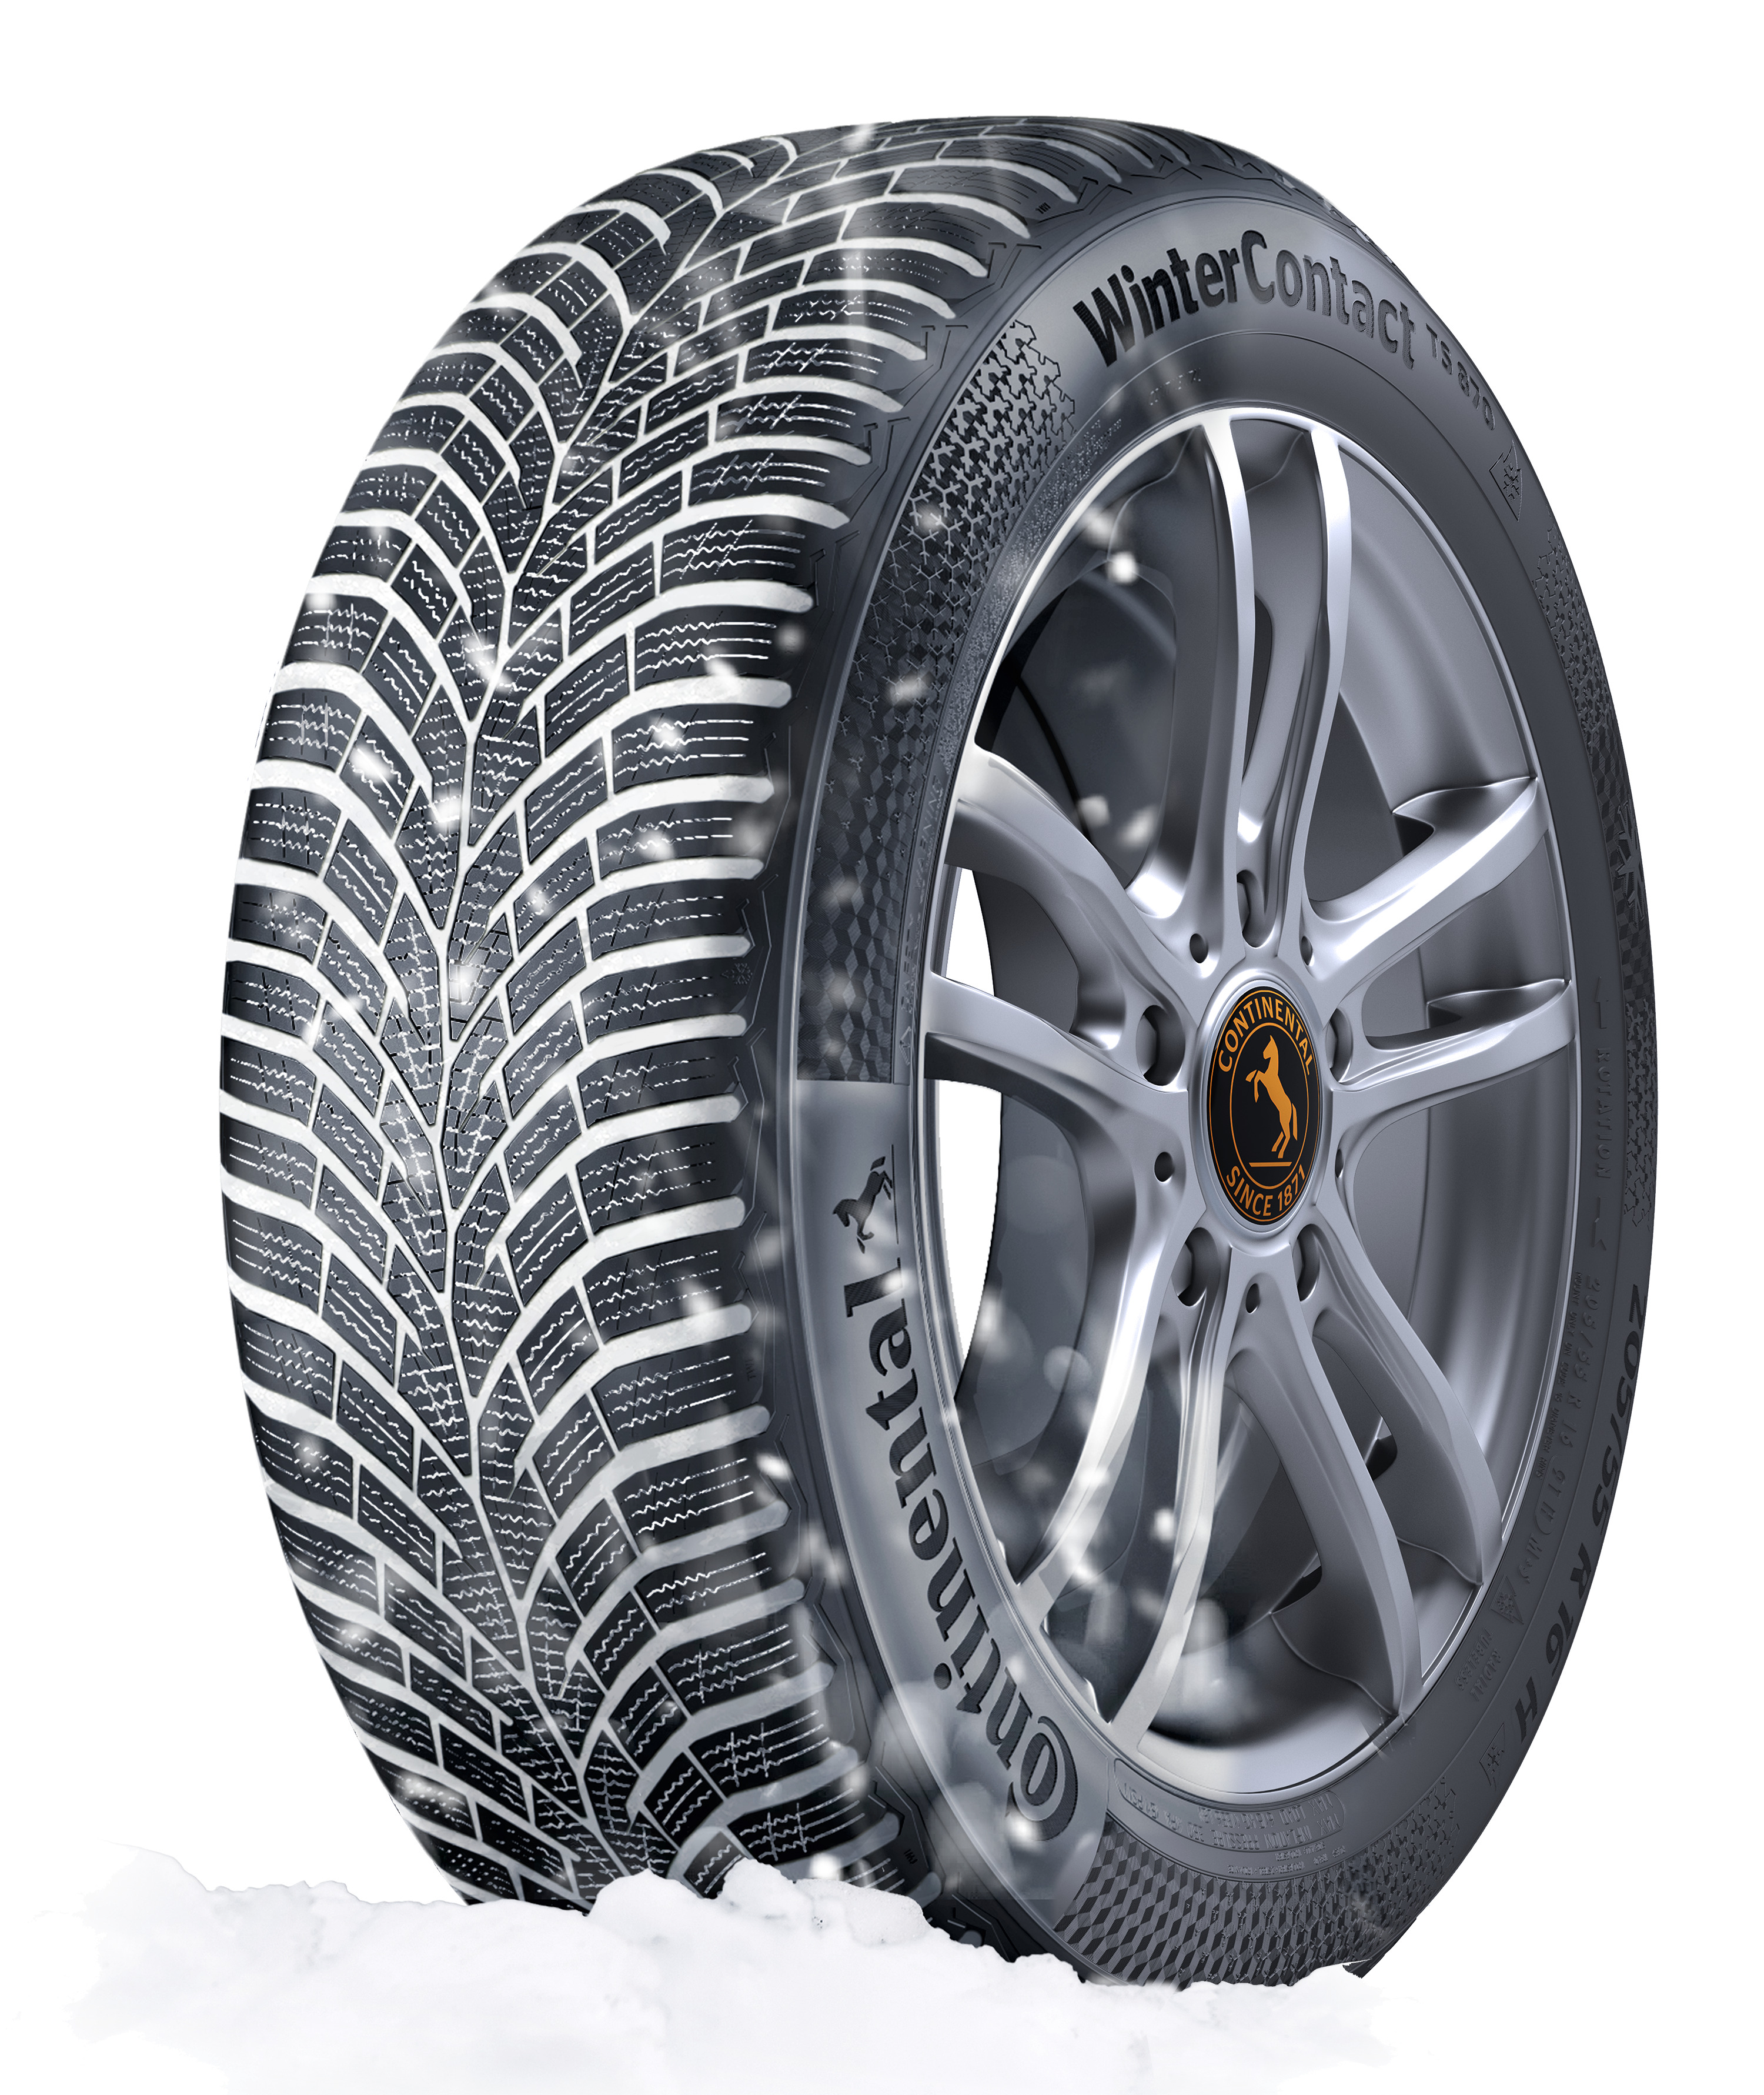 Tyre TS takes win Winter AG - Continental Test 870 in the WinterContact™ the Auto Express Continental\'s